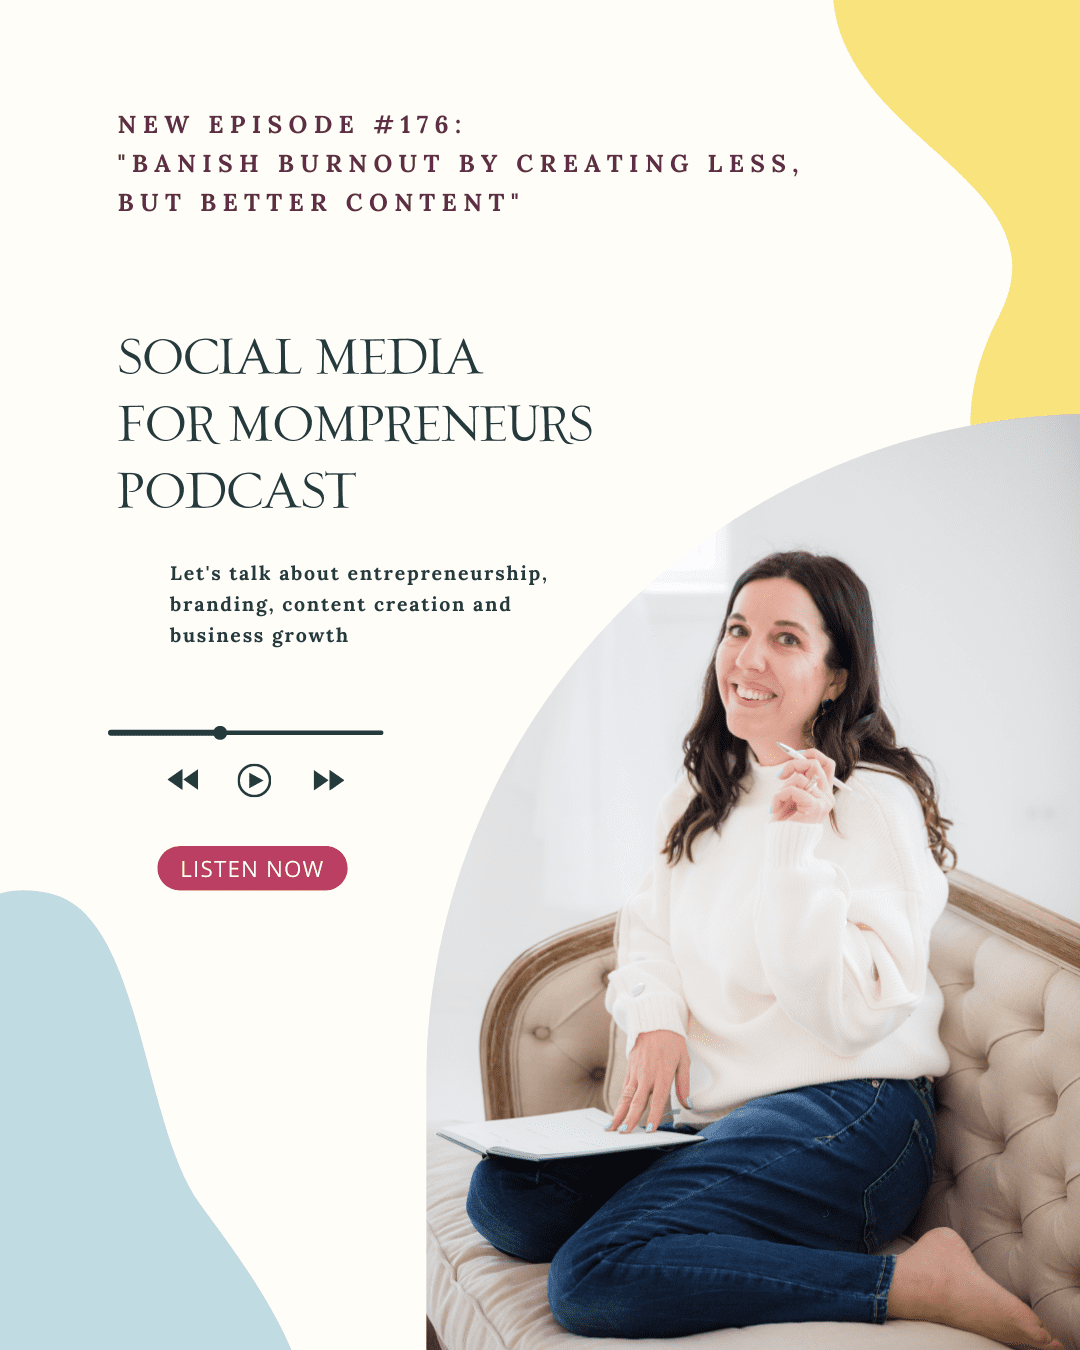 Banish burnout by creating less, but better content. Podcast host, Allison Scholes, on the Social Media for Mompreneurs Podcast.